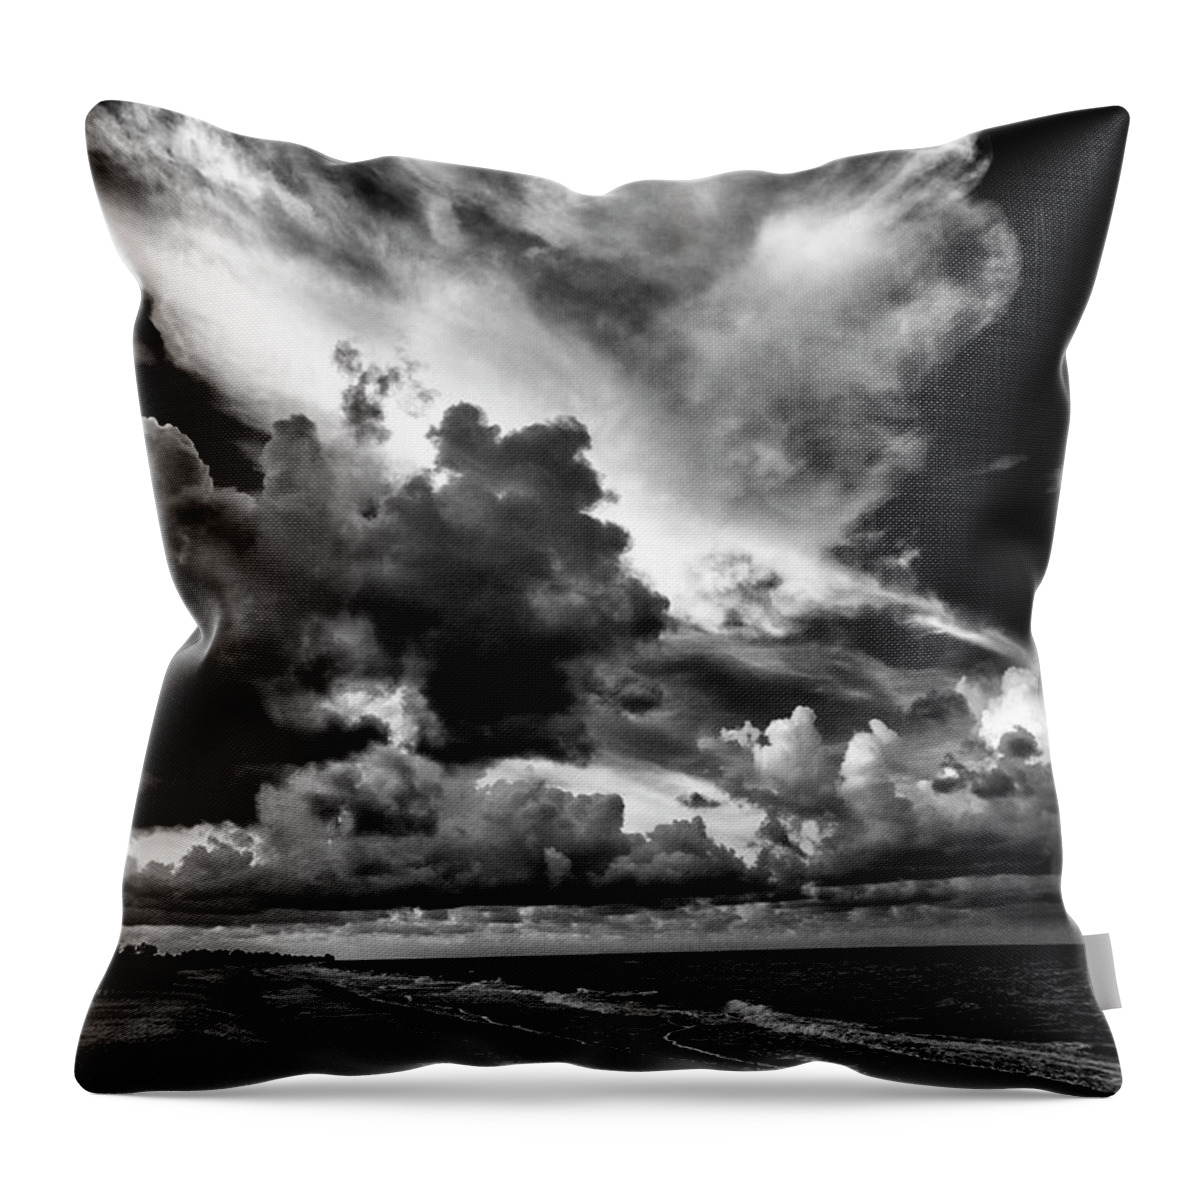 Clouds Throw Pillow featuring the photograph At The Beach by Kevin Cable